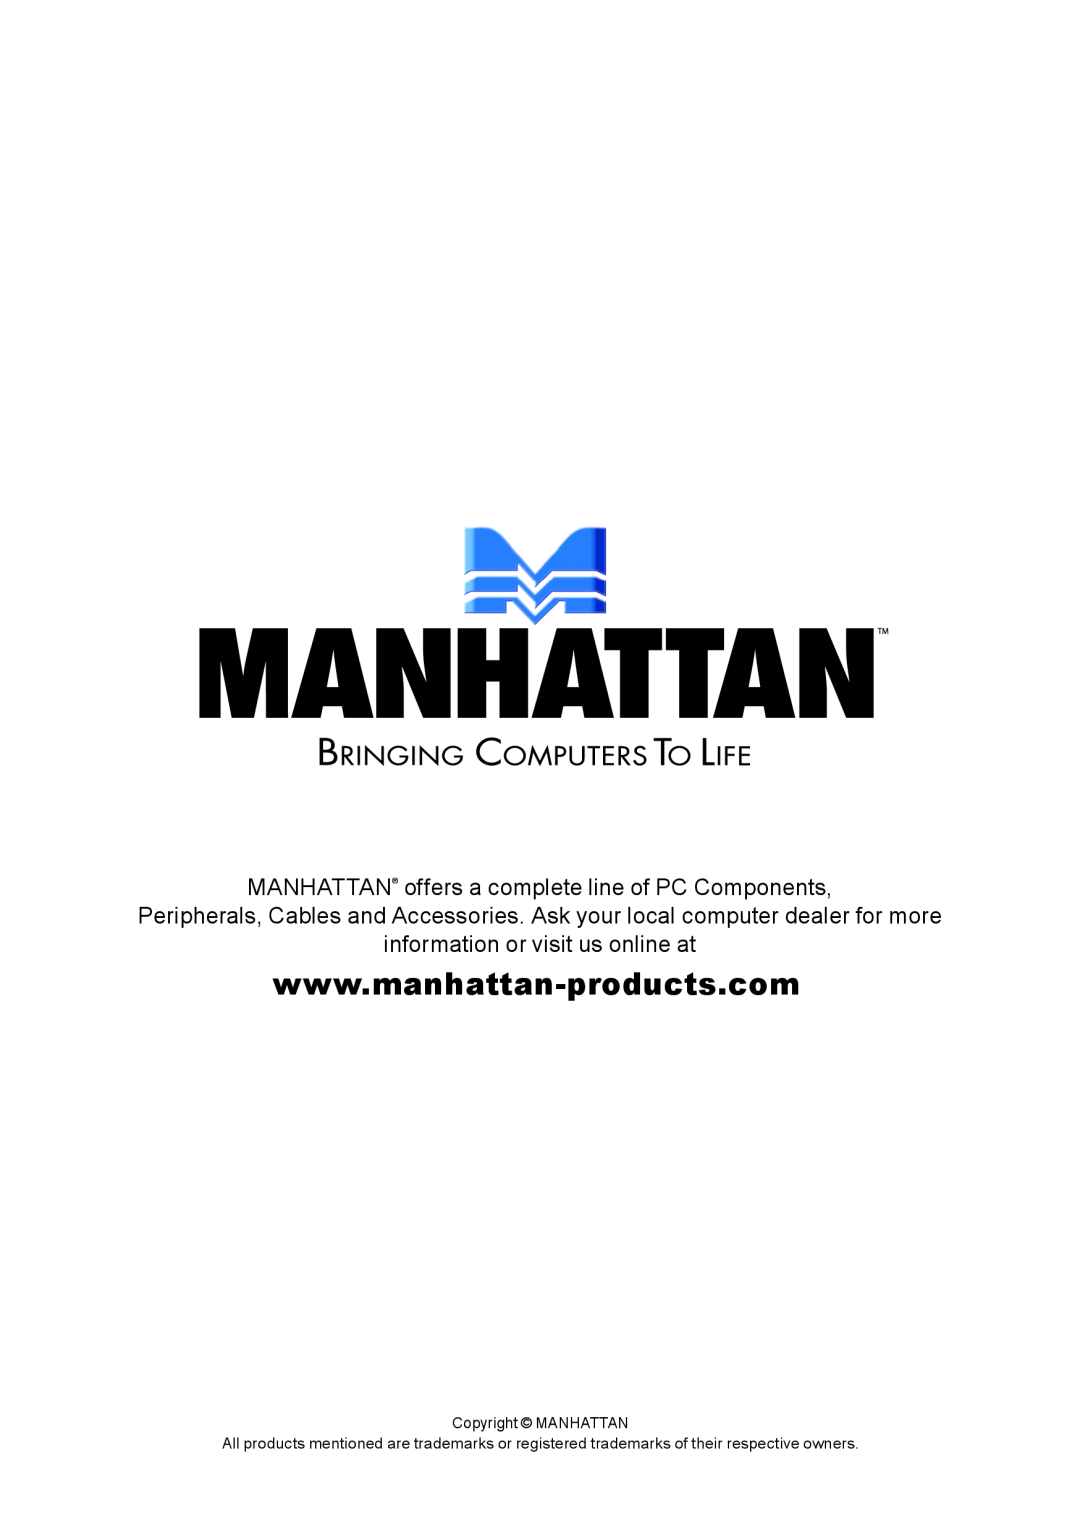 Manhattan Computer Products 177122 MANHATTAN offers a complete line of PC Components, information or visit us online at 